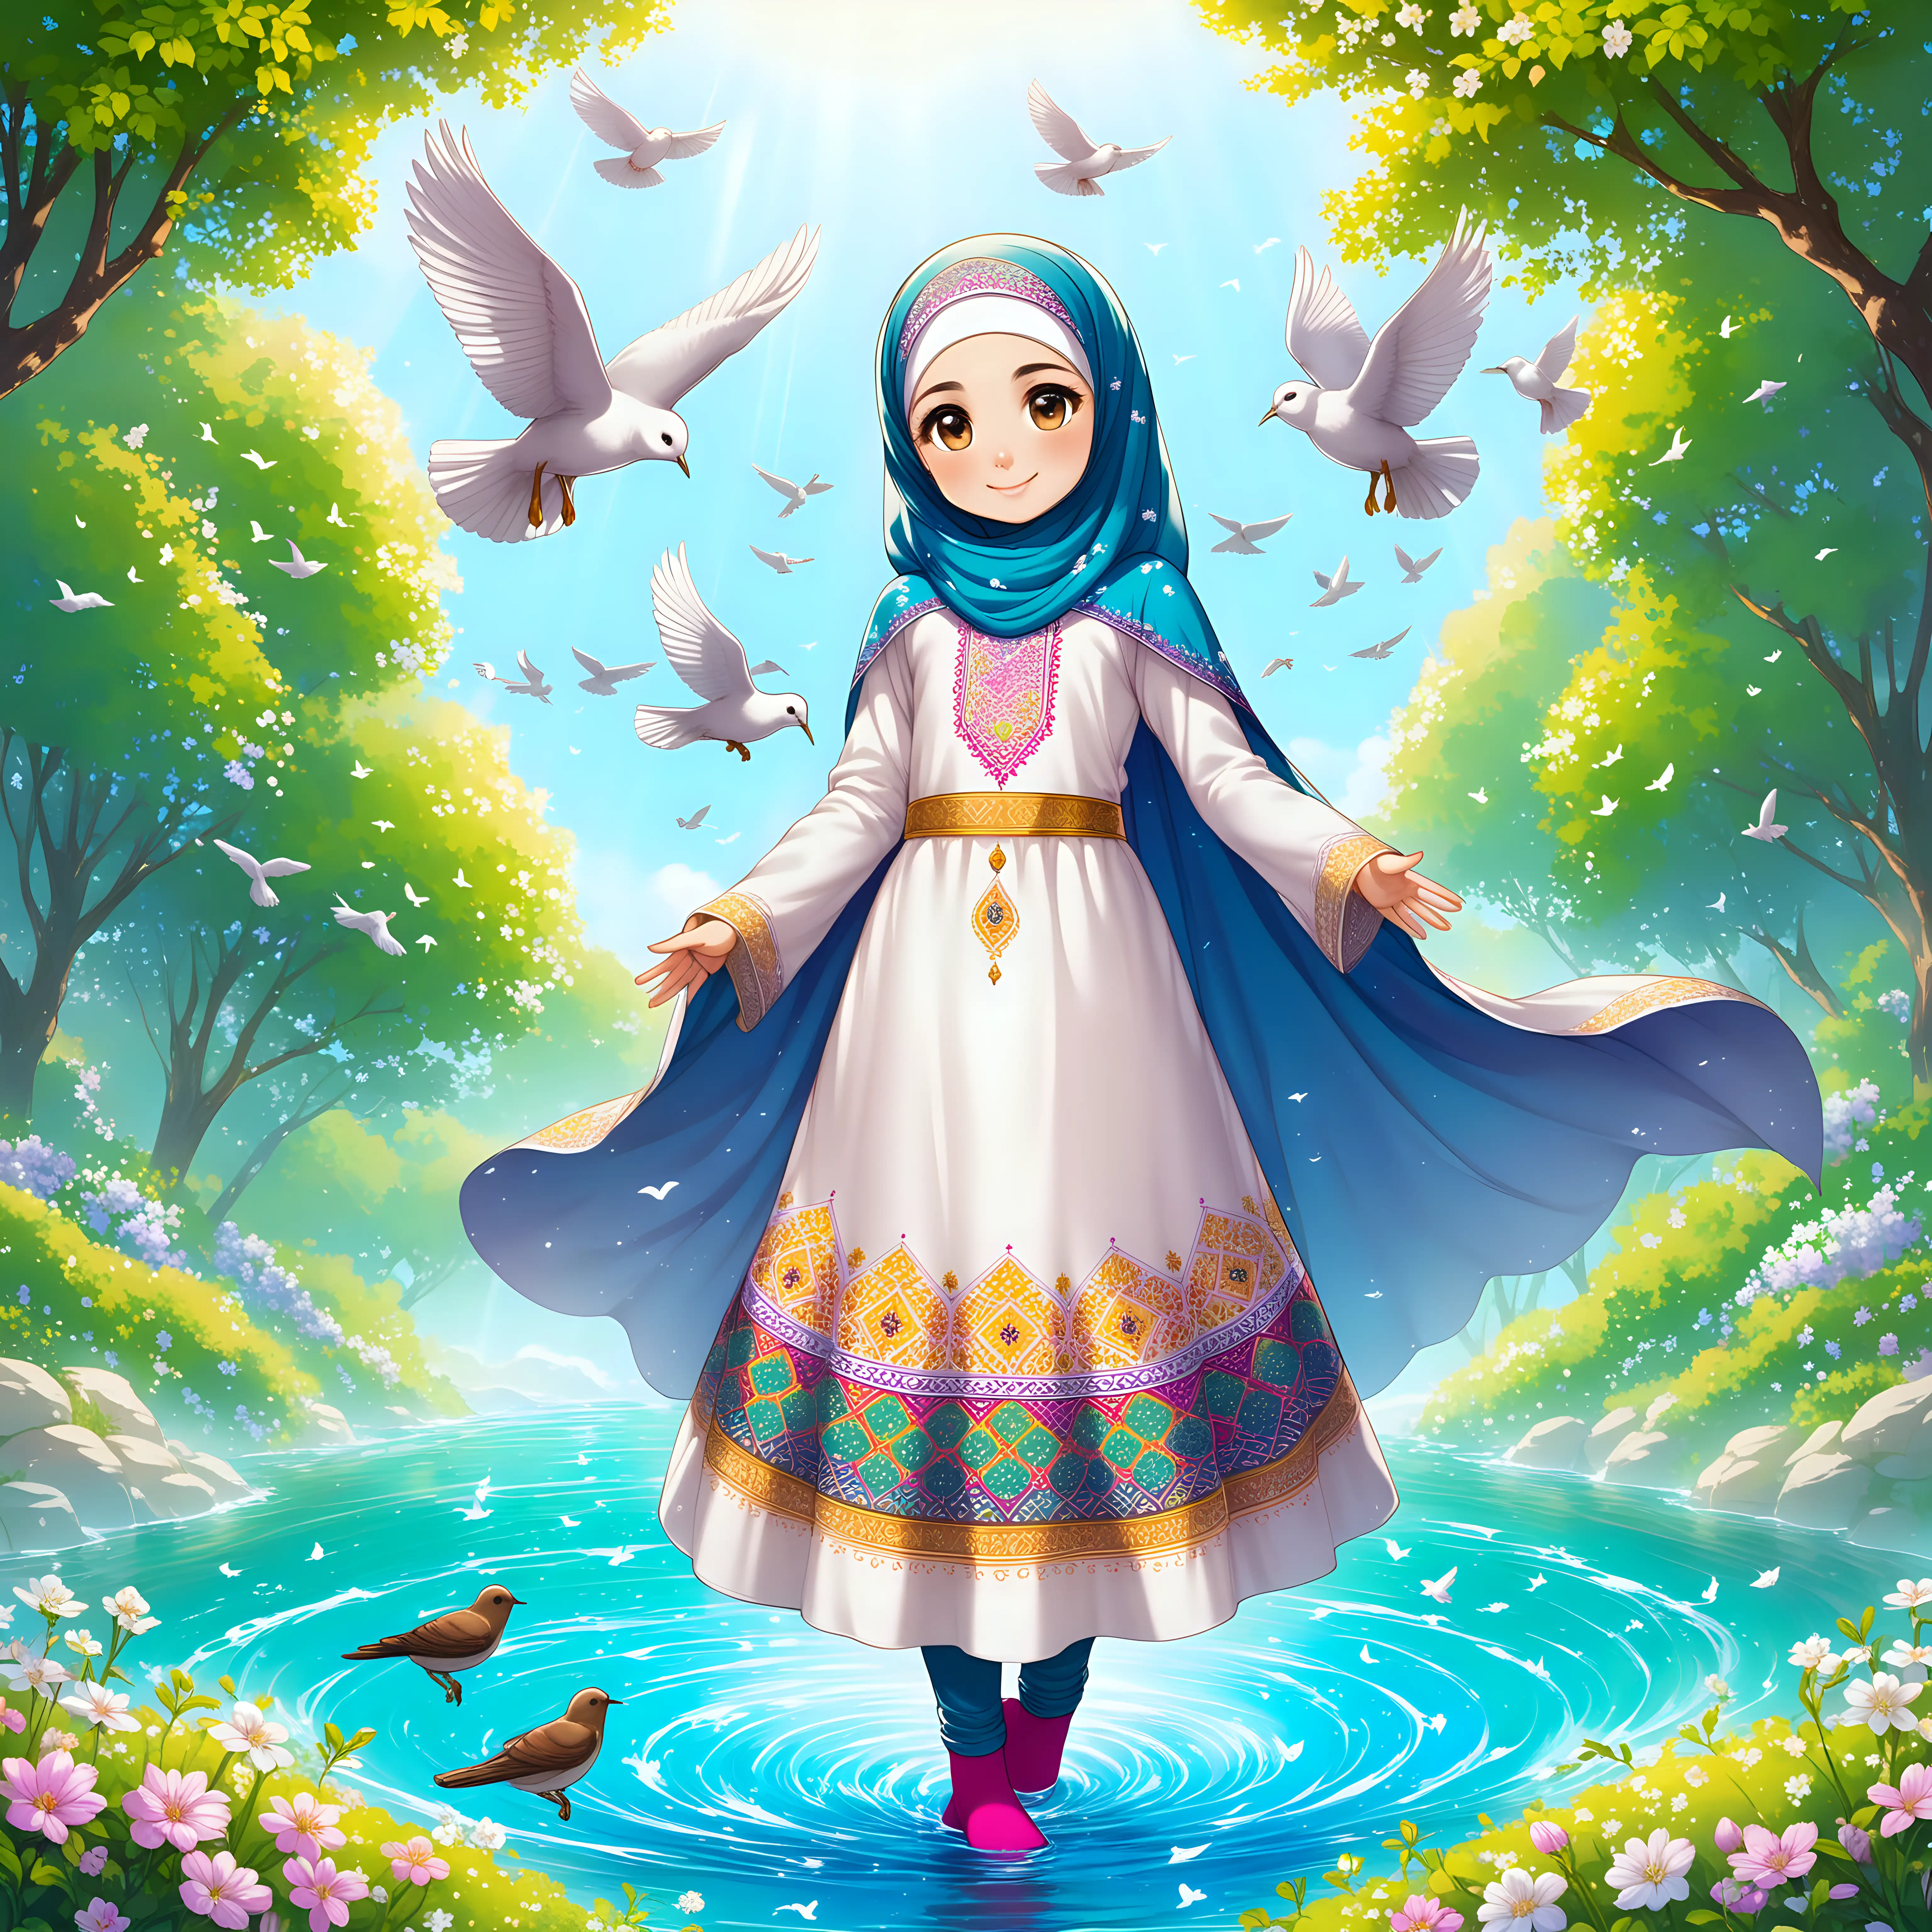 Persian Girl at Spring Serene Beauty with Floral Ambiance